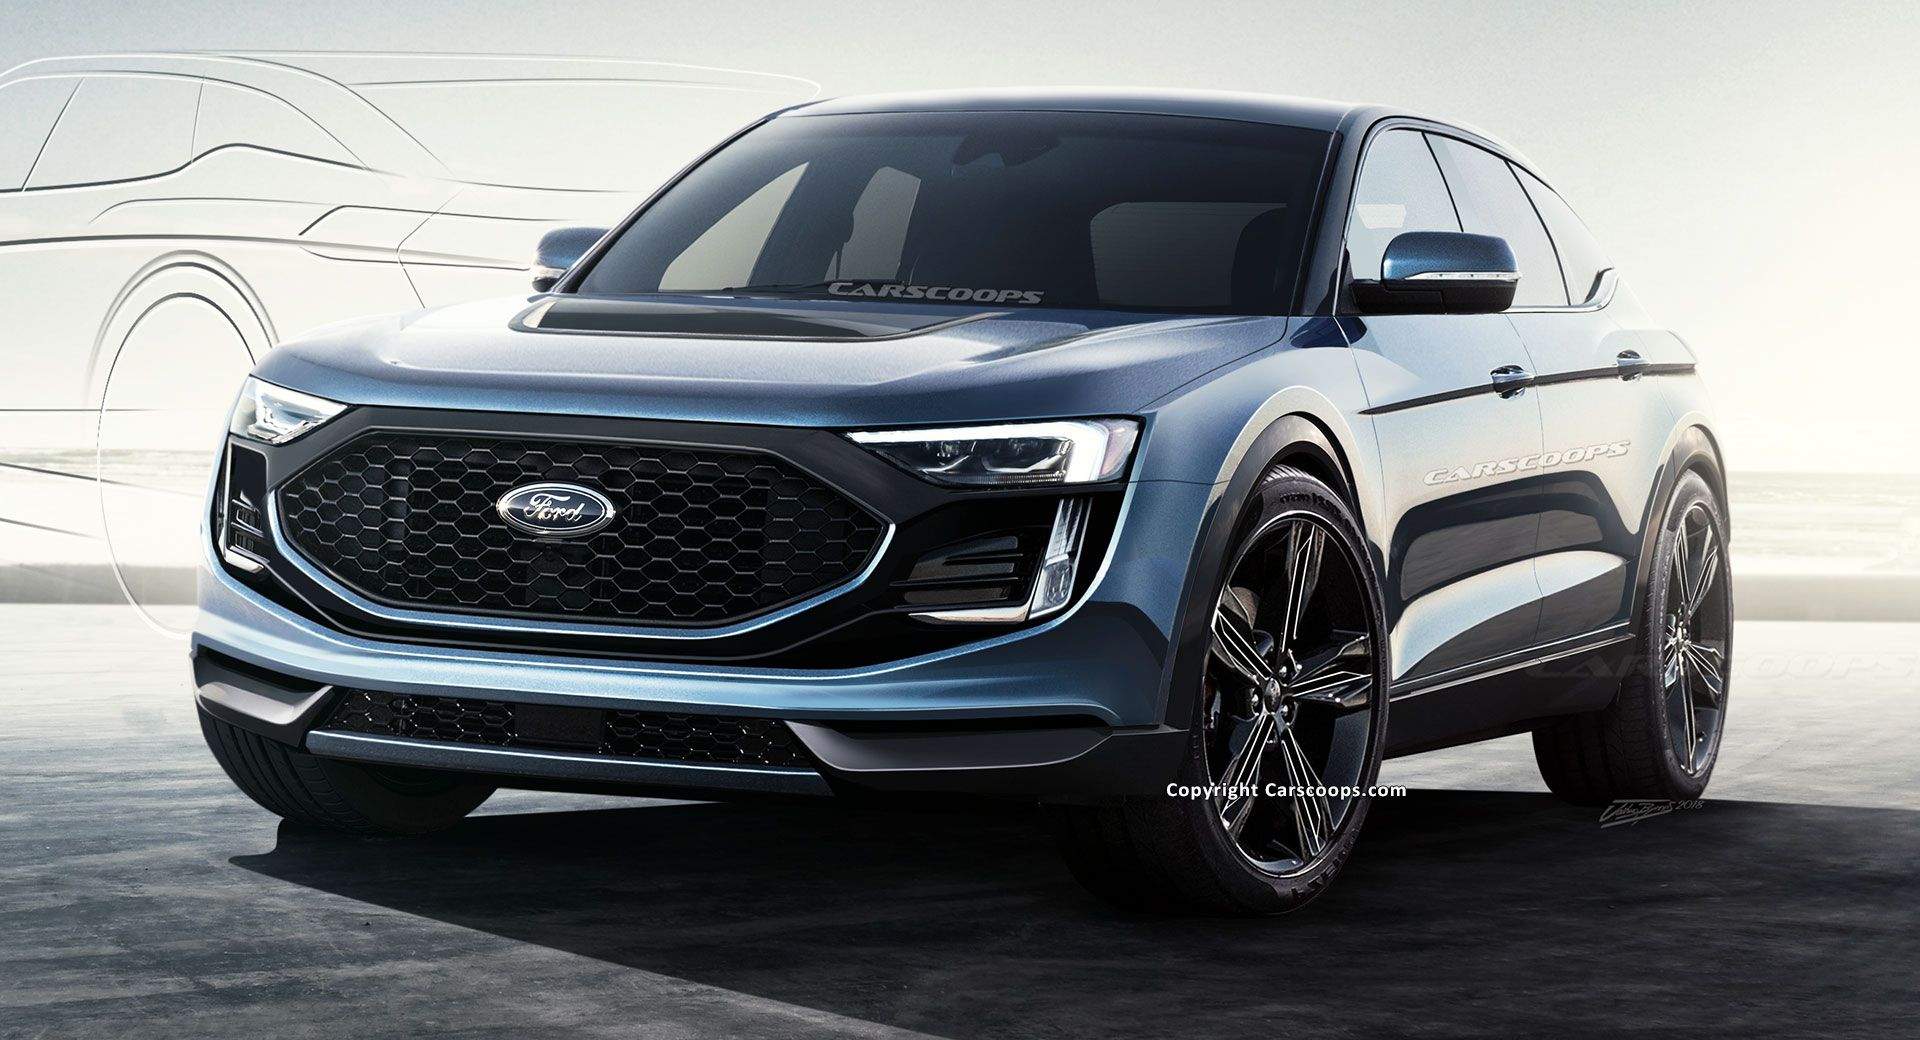 2020-Ford-Mach-1-Electric-SUV-Carscoops-2.jpg